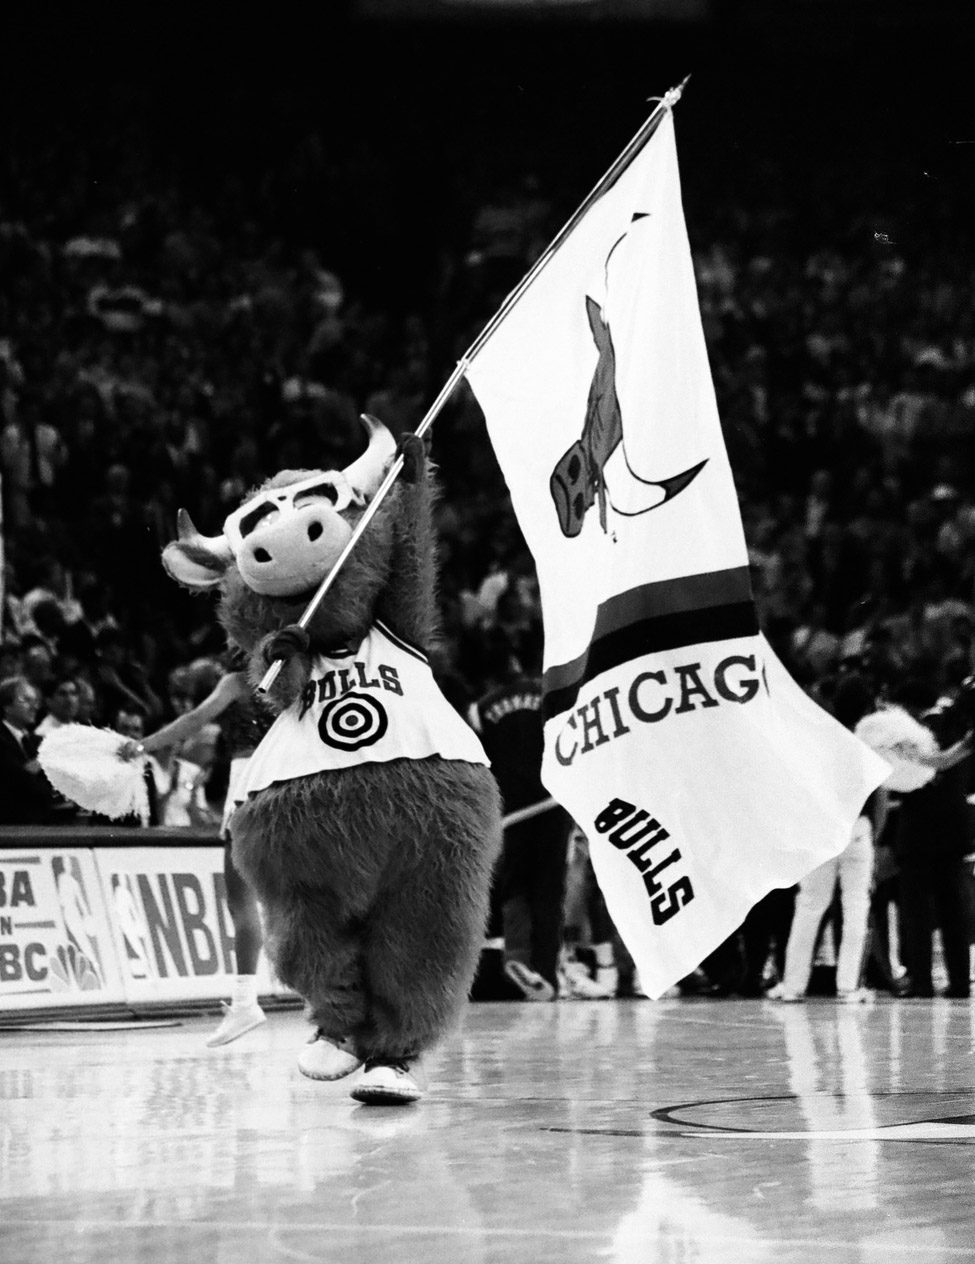 Black and white photograph of the Bulls mascot, a fuzzy bull with a round belly, wearing a Bulls jersey and glasses carries a white flag with the Bulls logo and the words "Chicago Bulls" across the court.